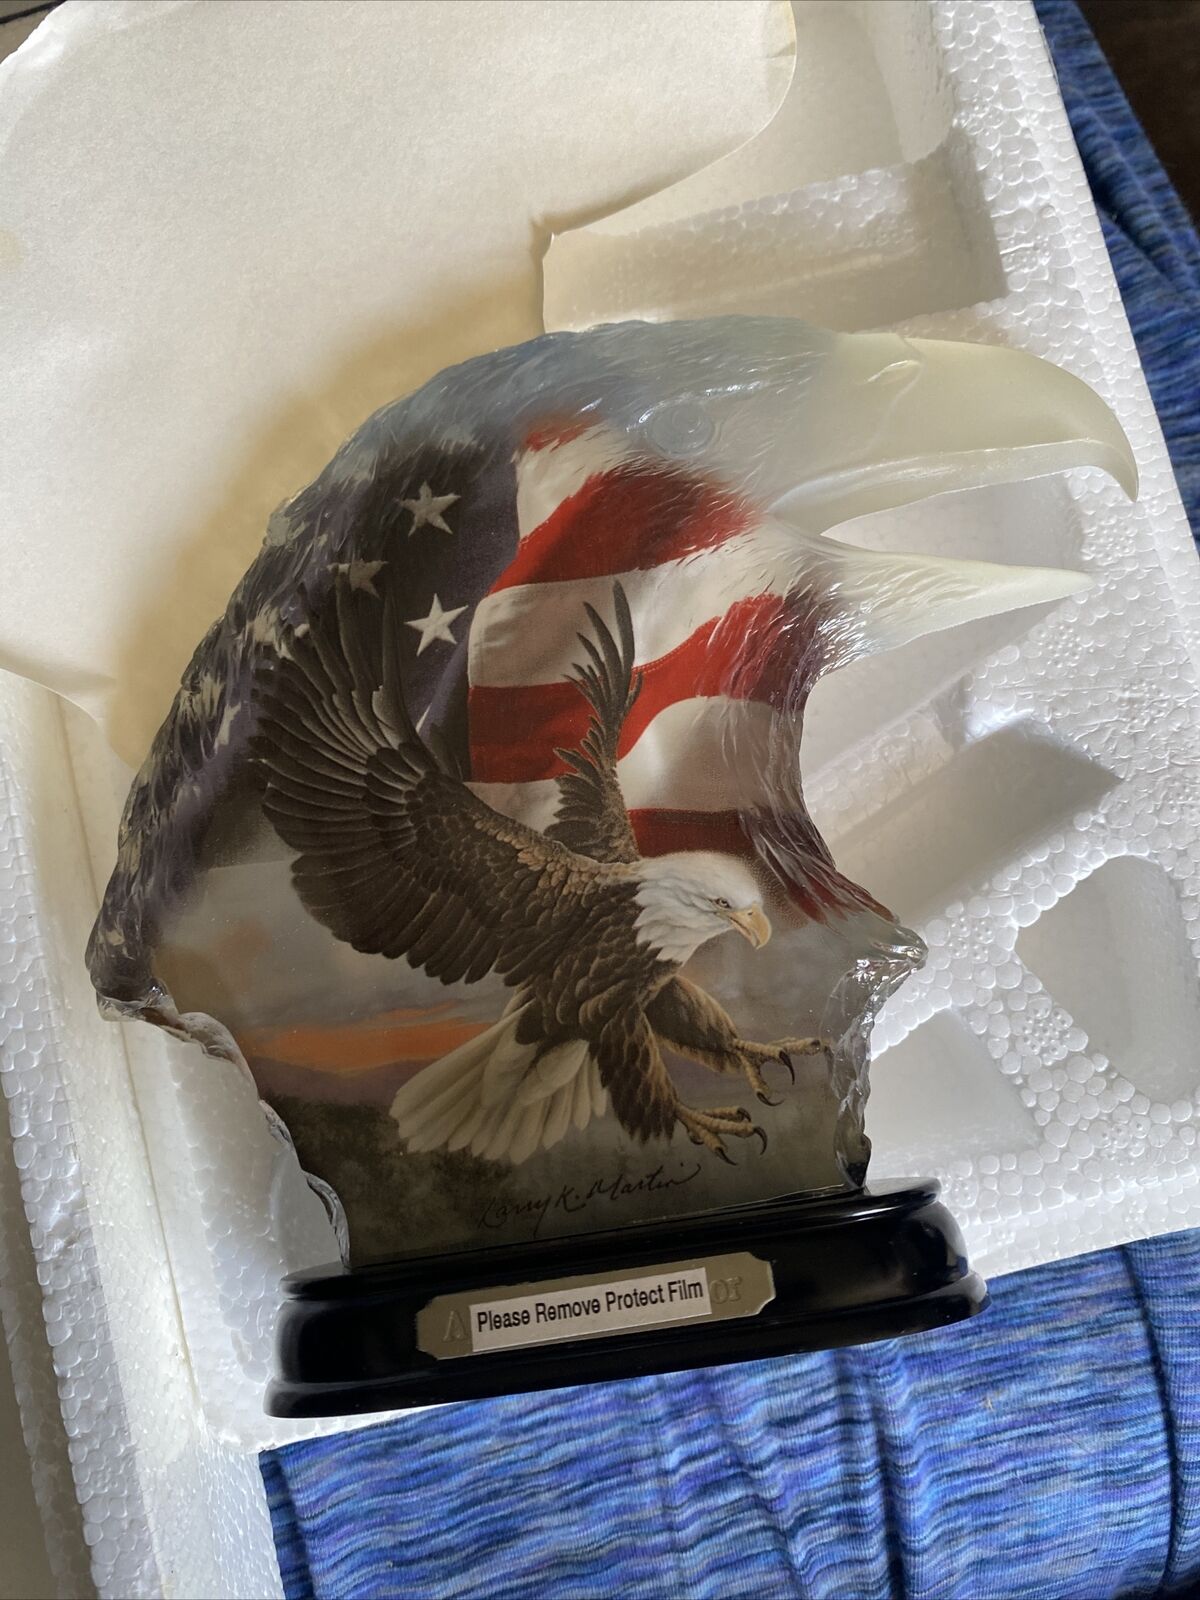 New Bradford Exchange 2002 “A Nation of Honor” Eagle Figurine by Larry Martin